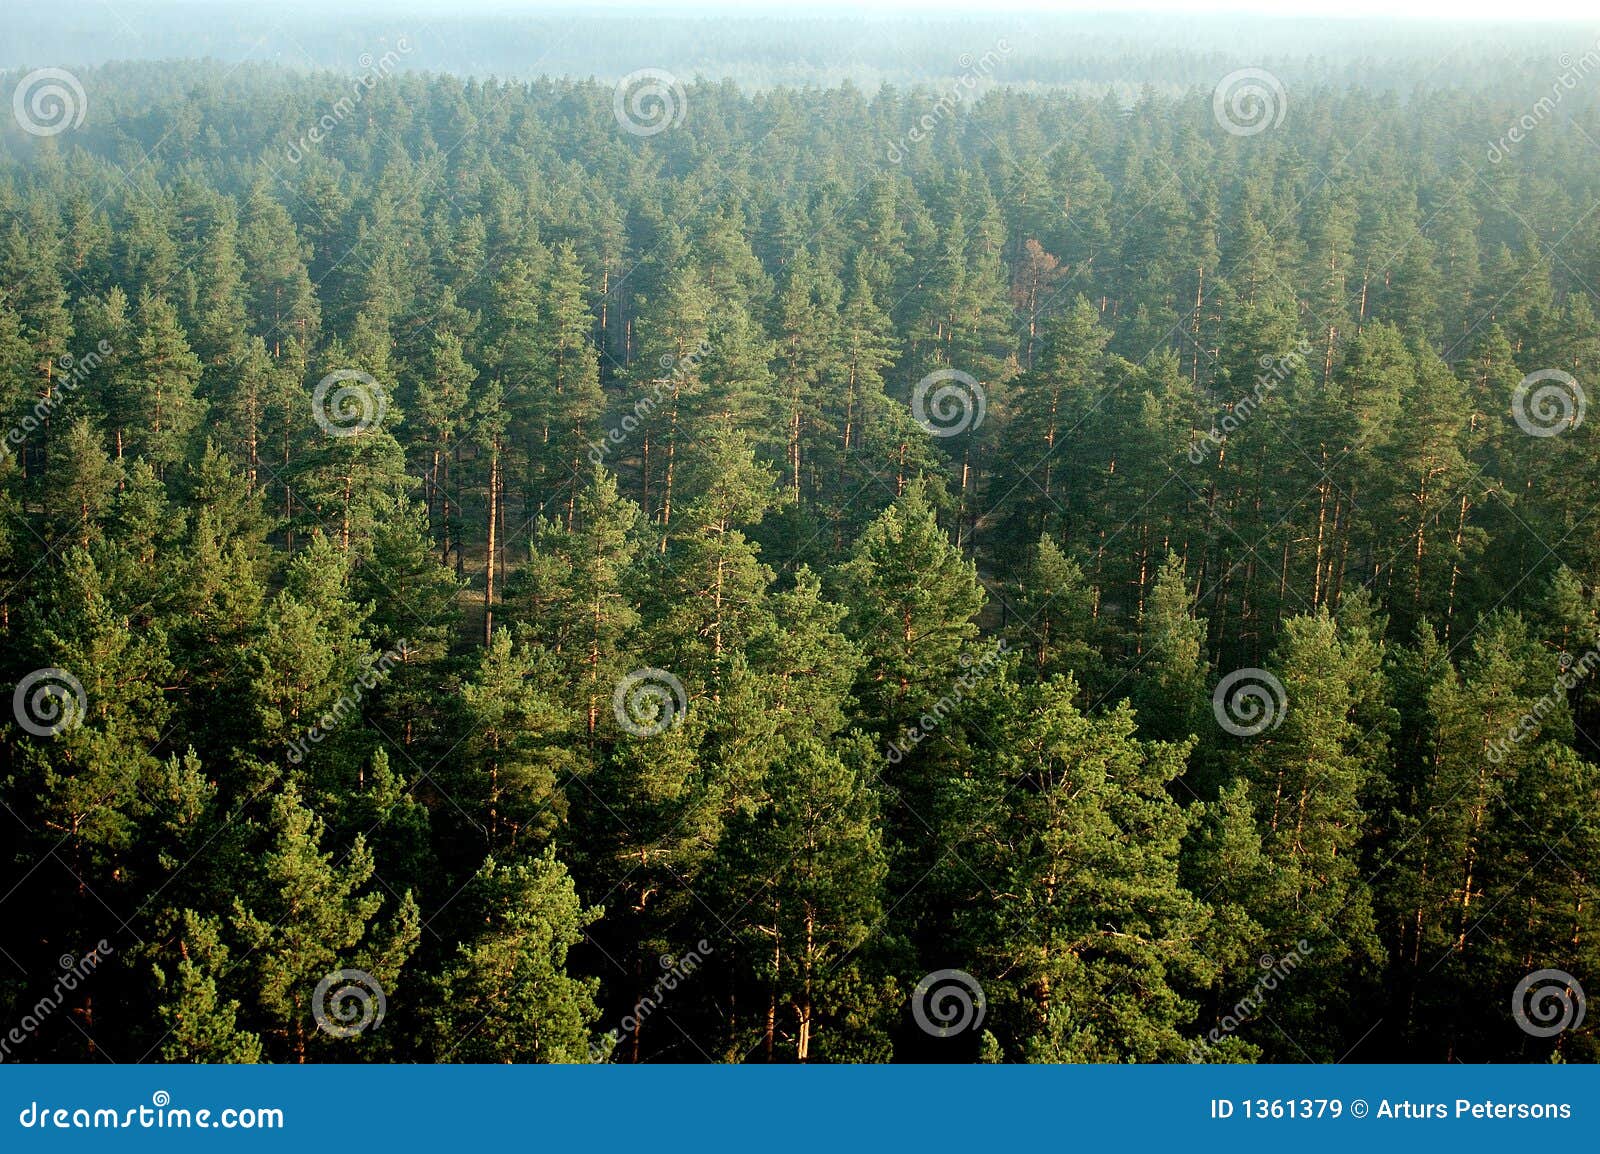 pine forest in mist (aerial)27